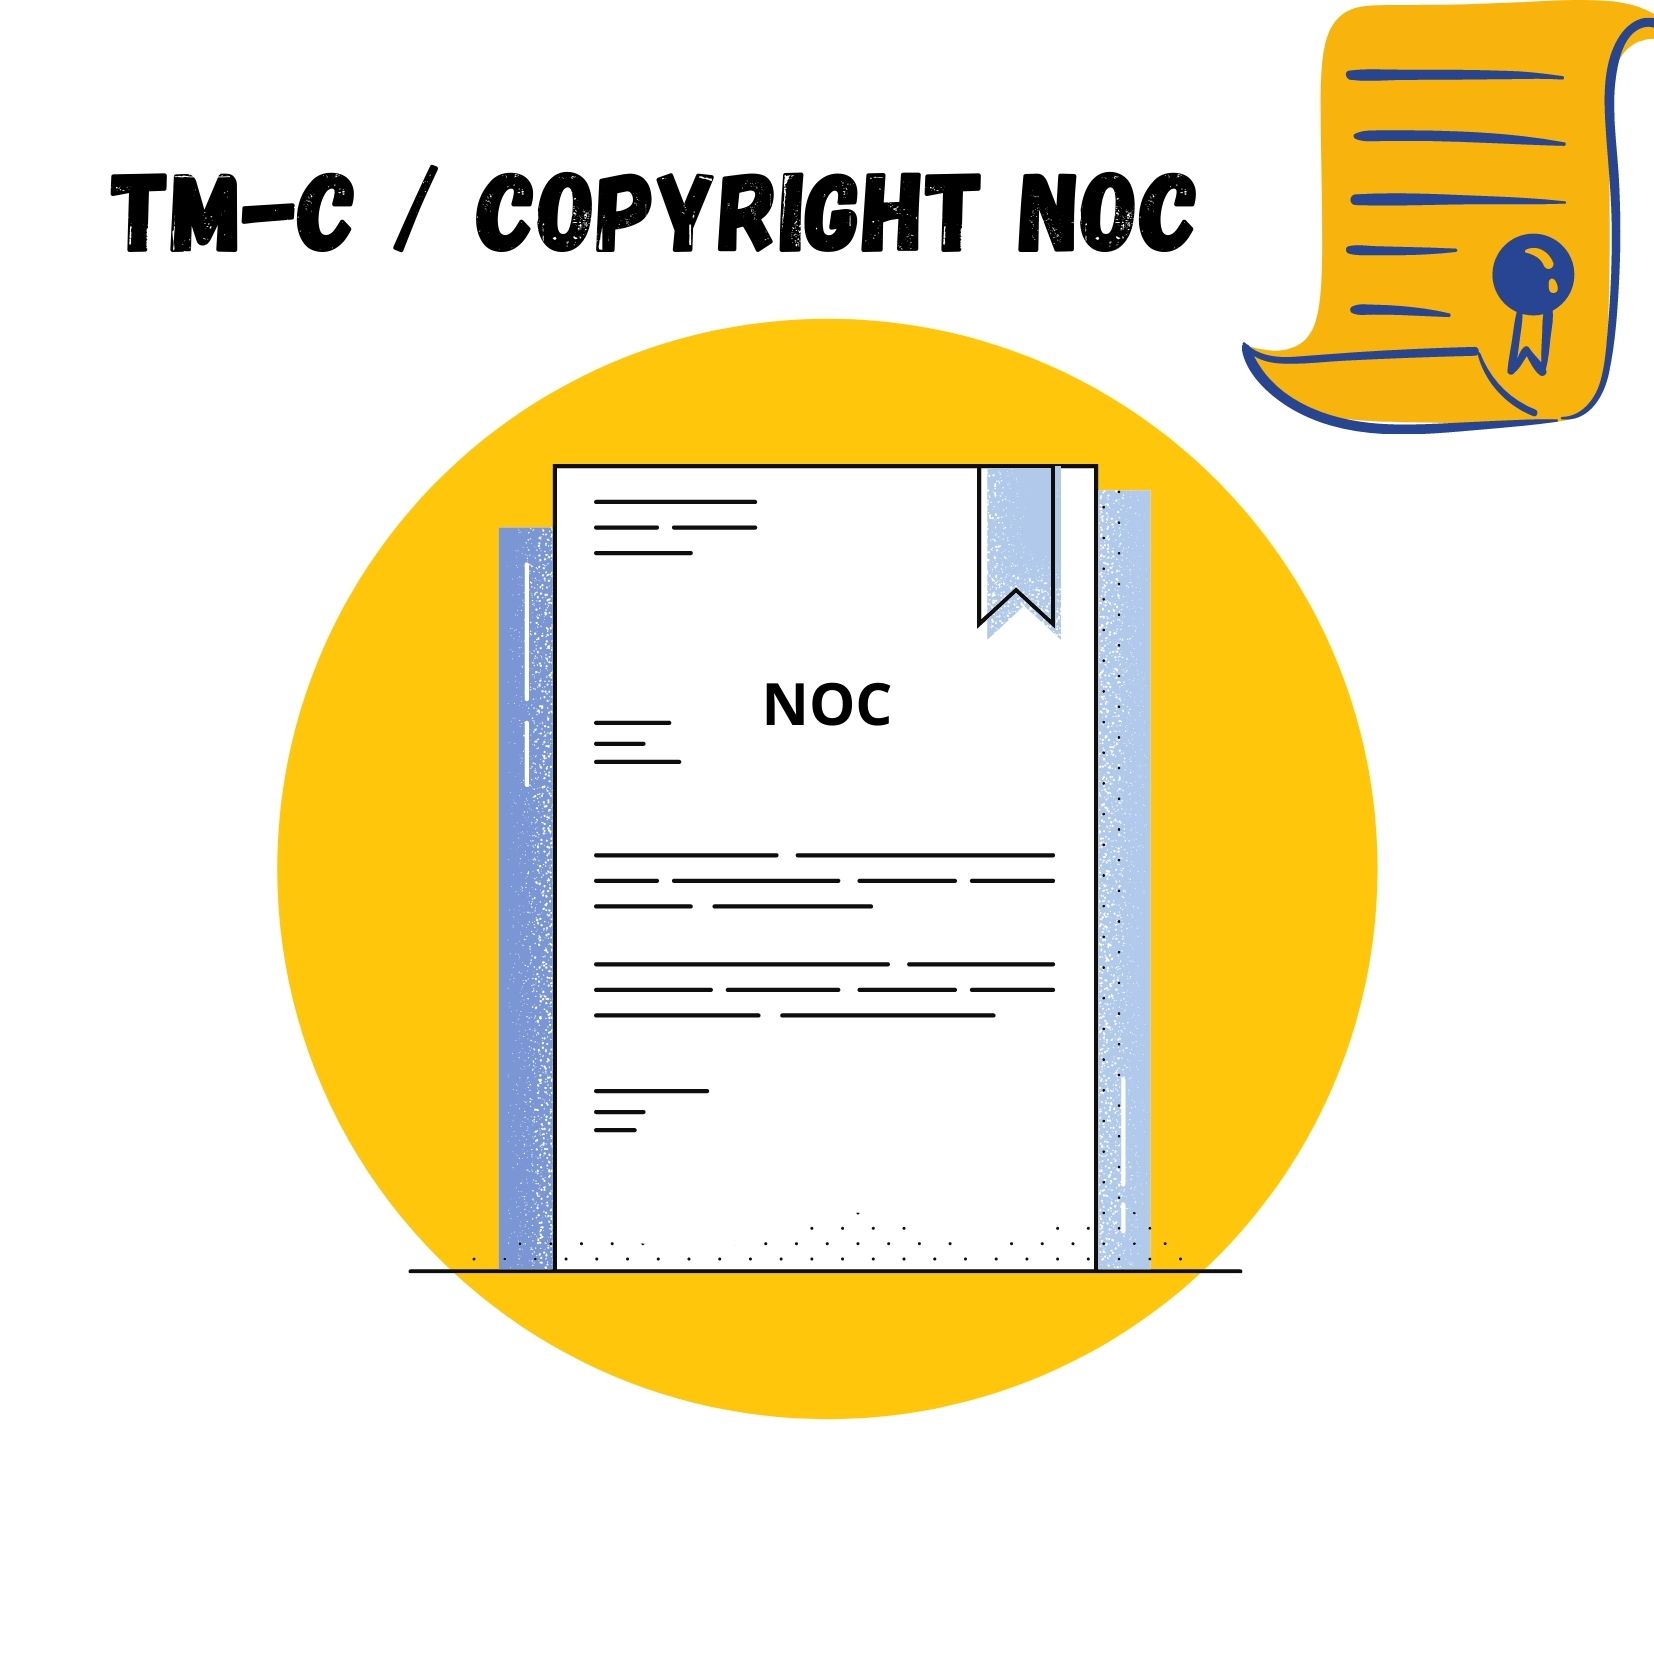 Copyright NOC and Search Certificate